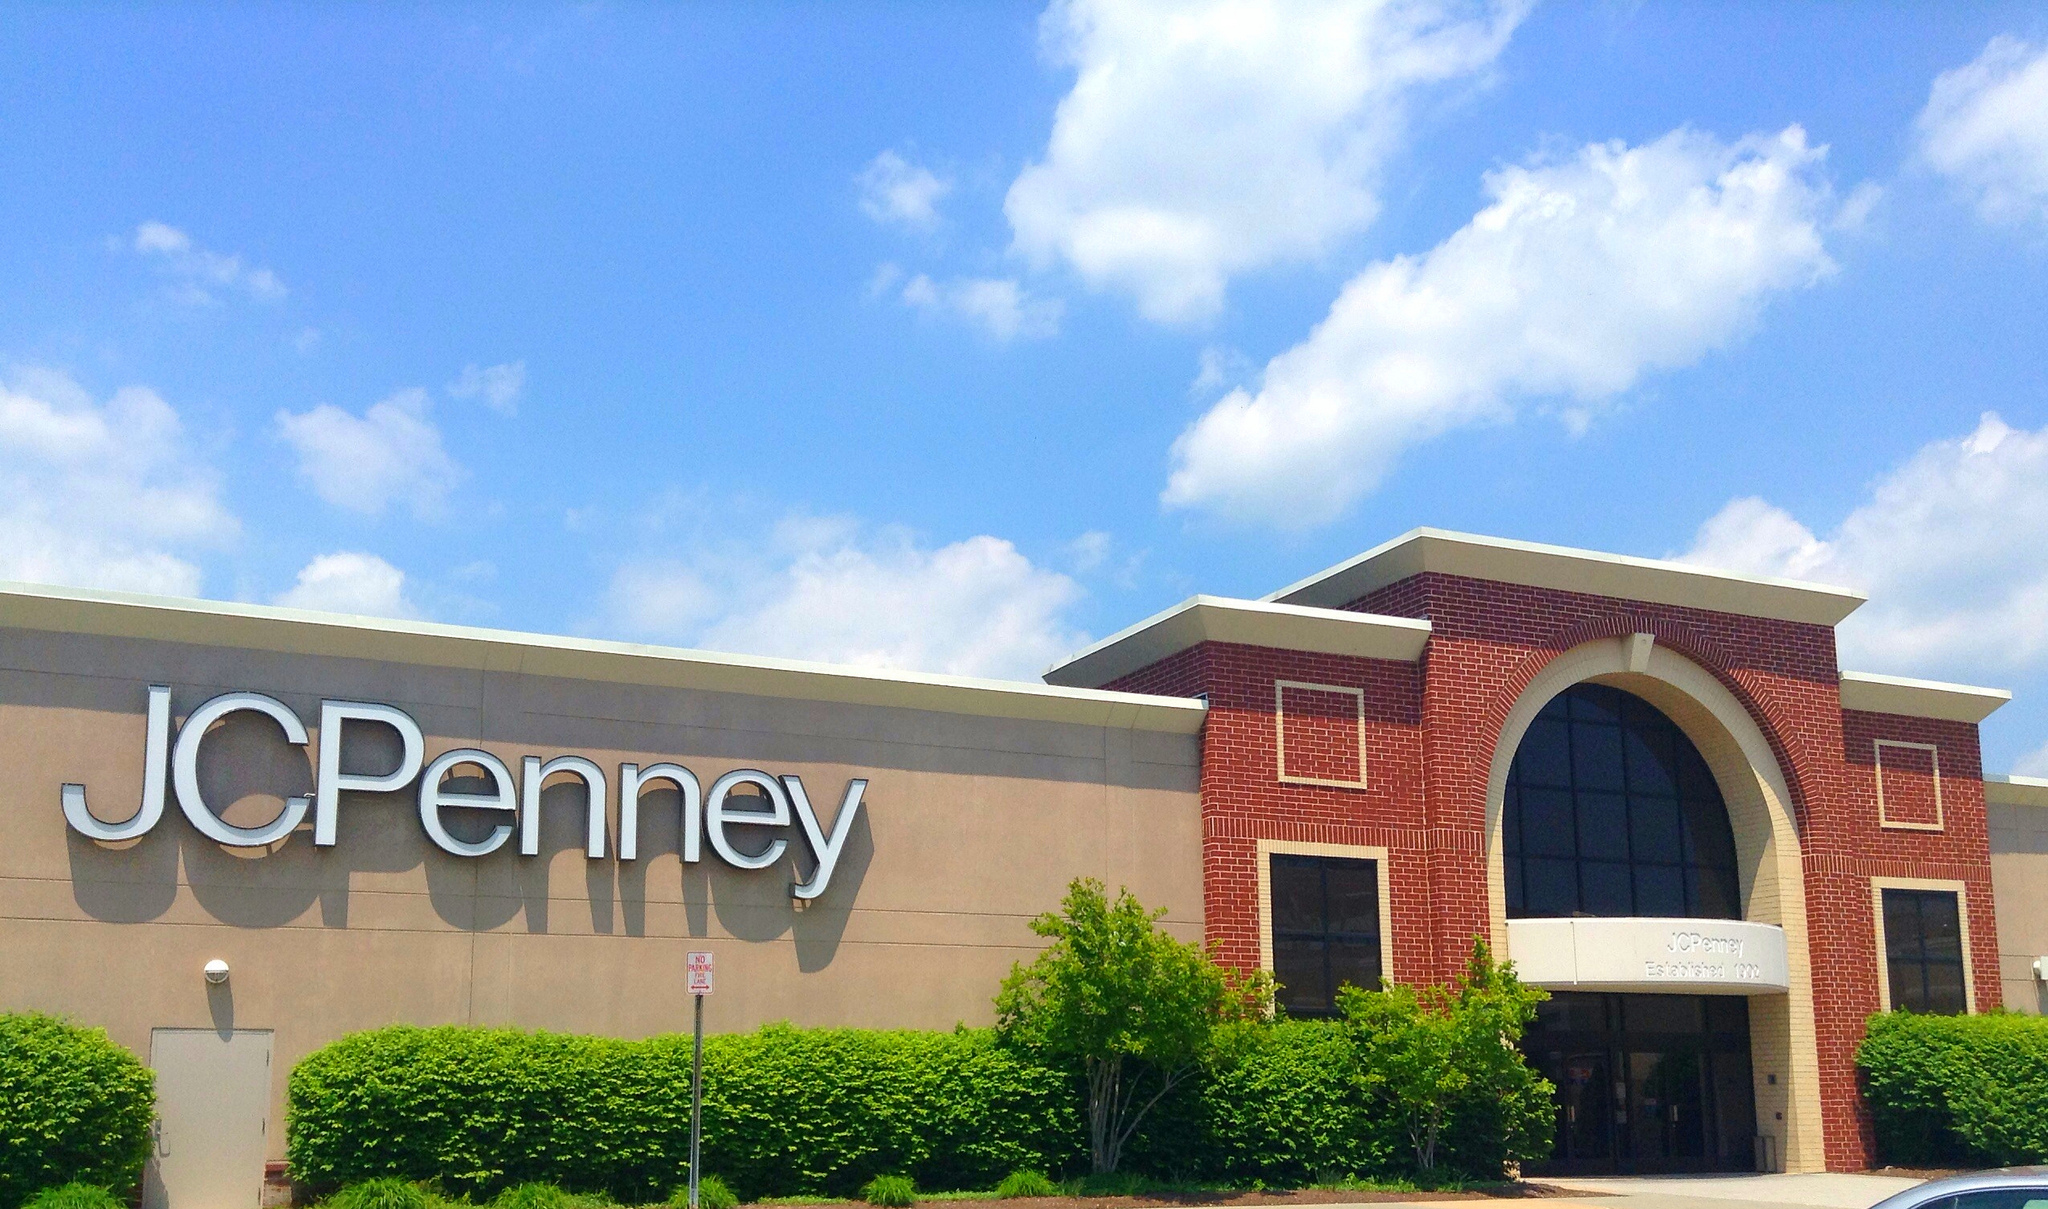 Predictions About Bad Weather Hurting Retailers Didn’t Come True At JCPenney